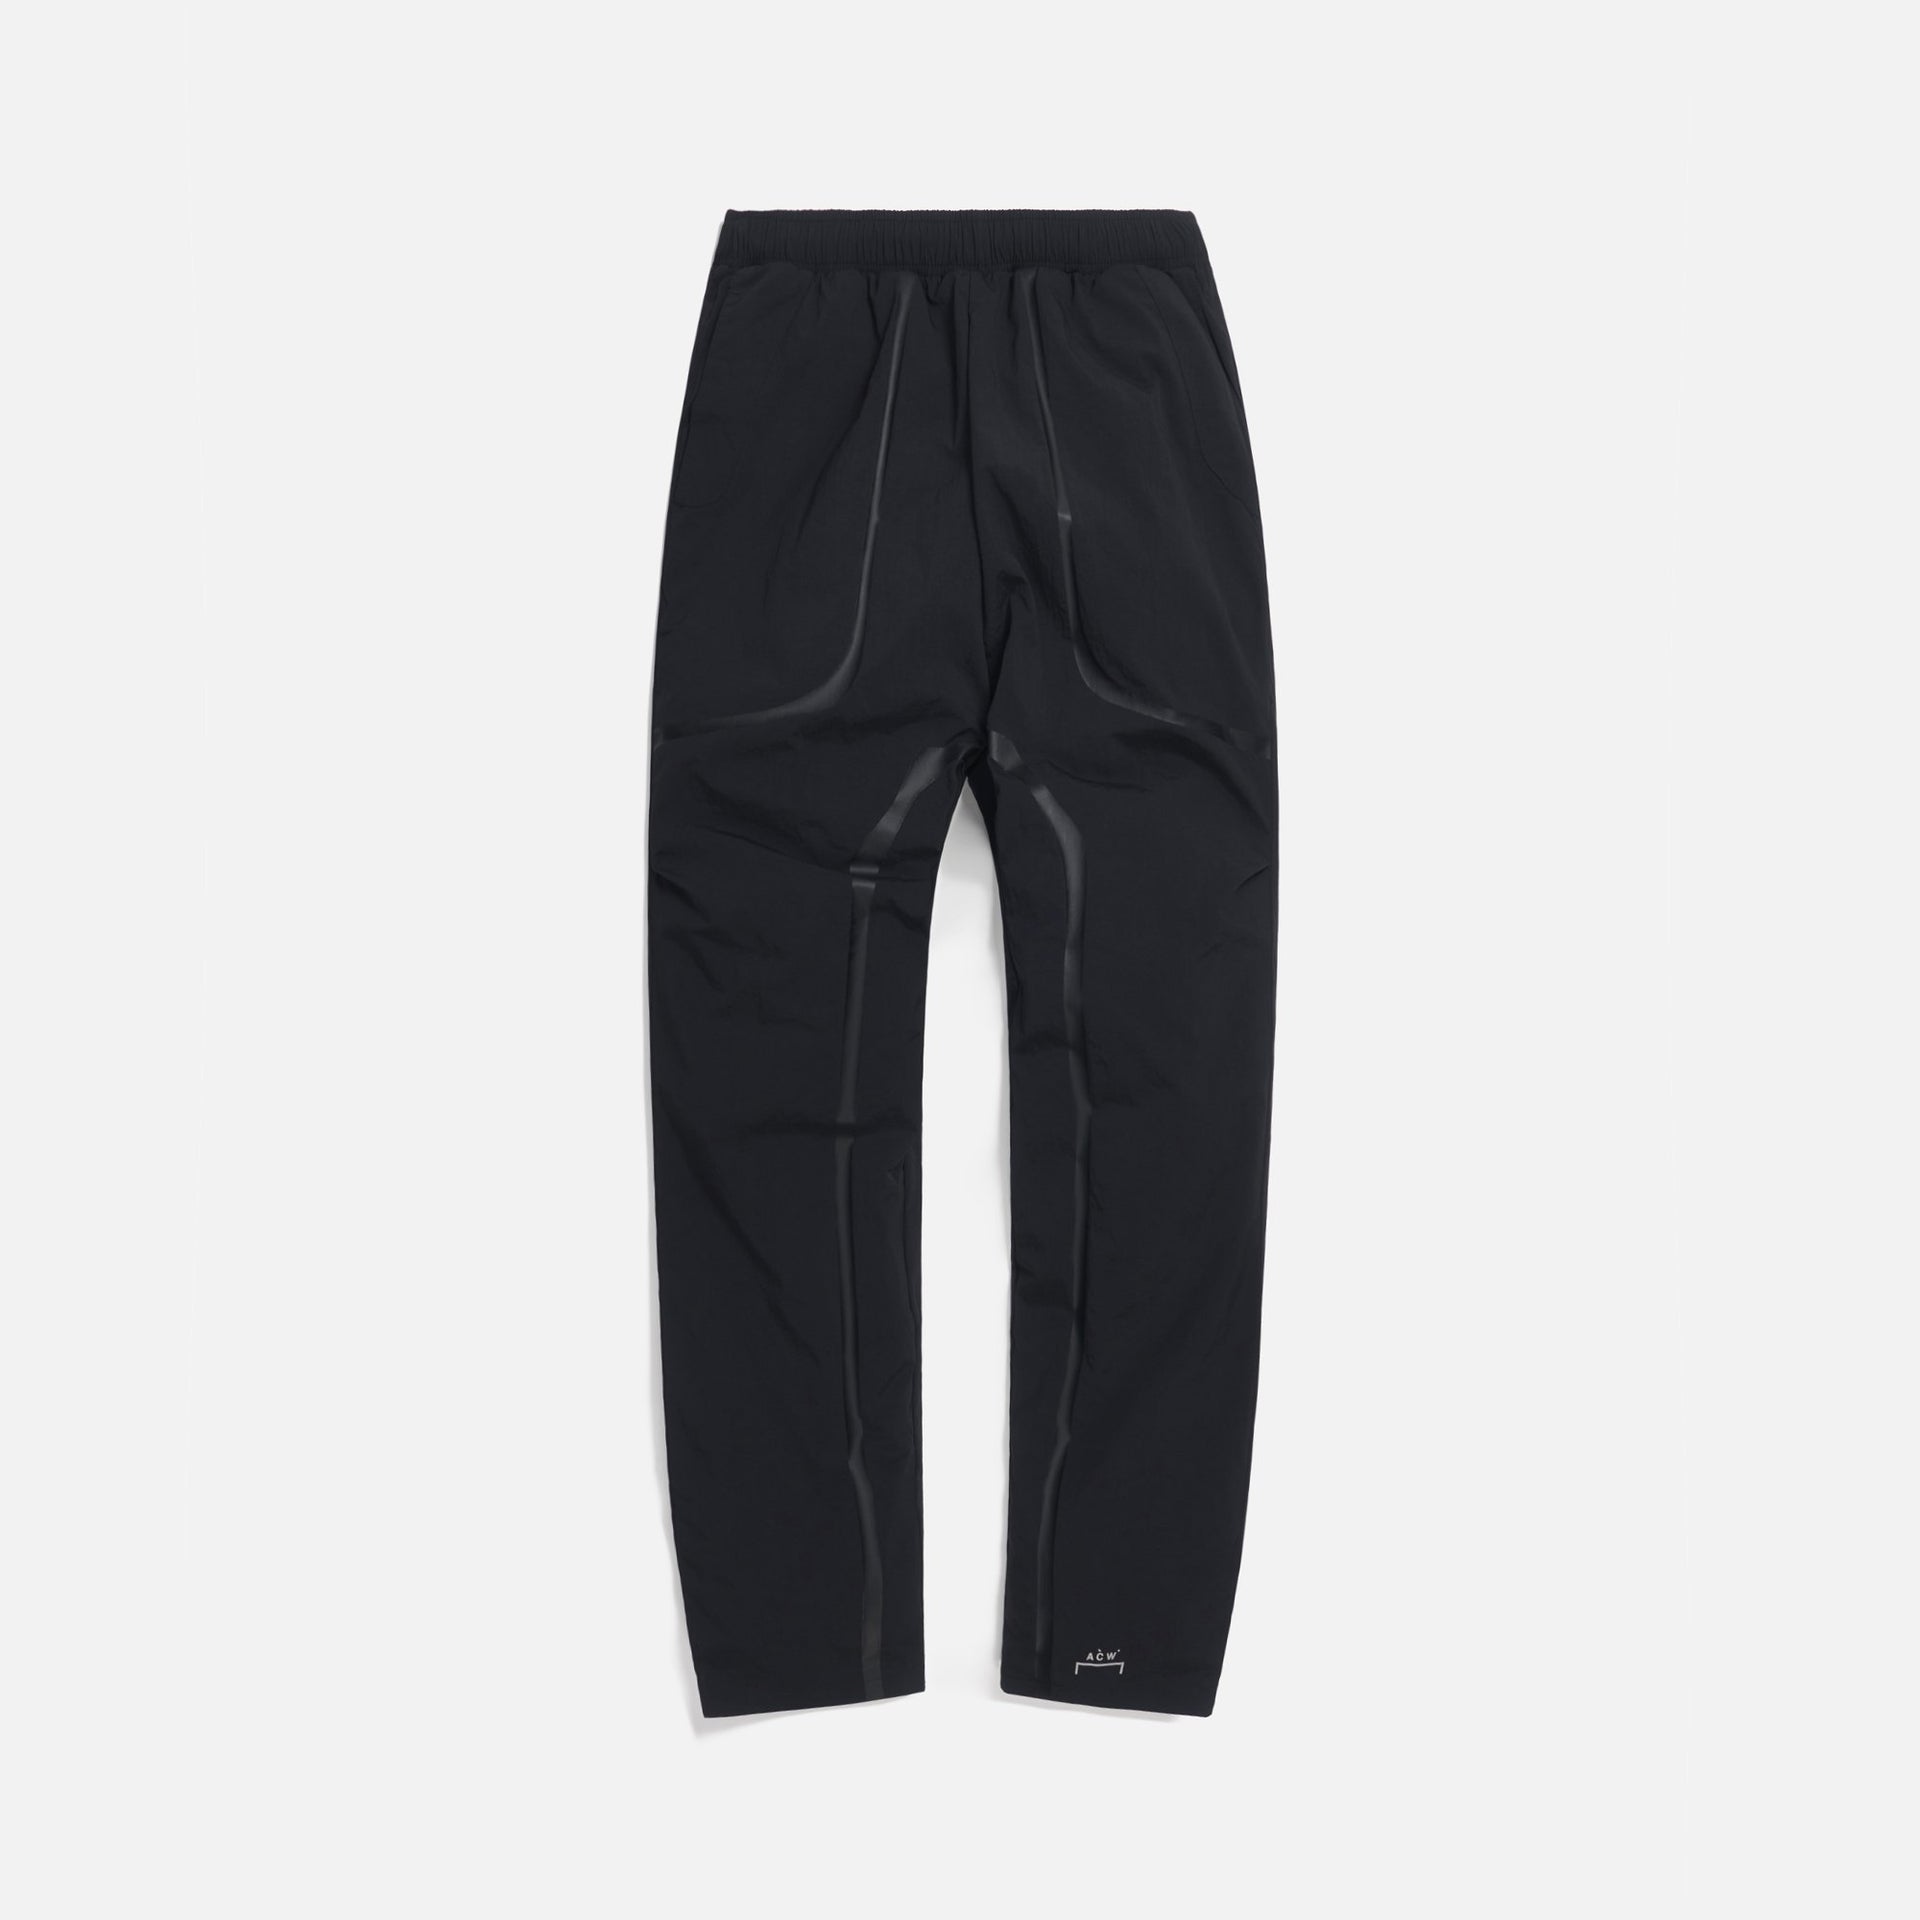 A Cold Wall Overlay Pants - Black